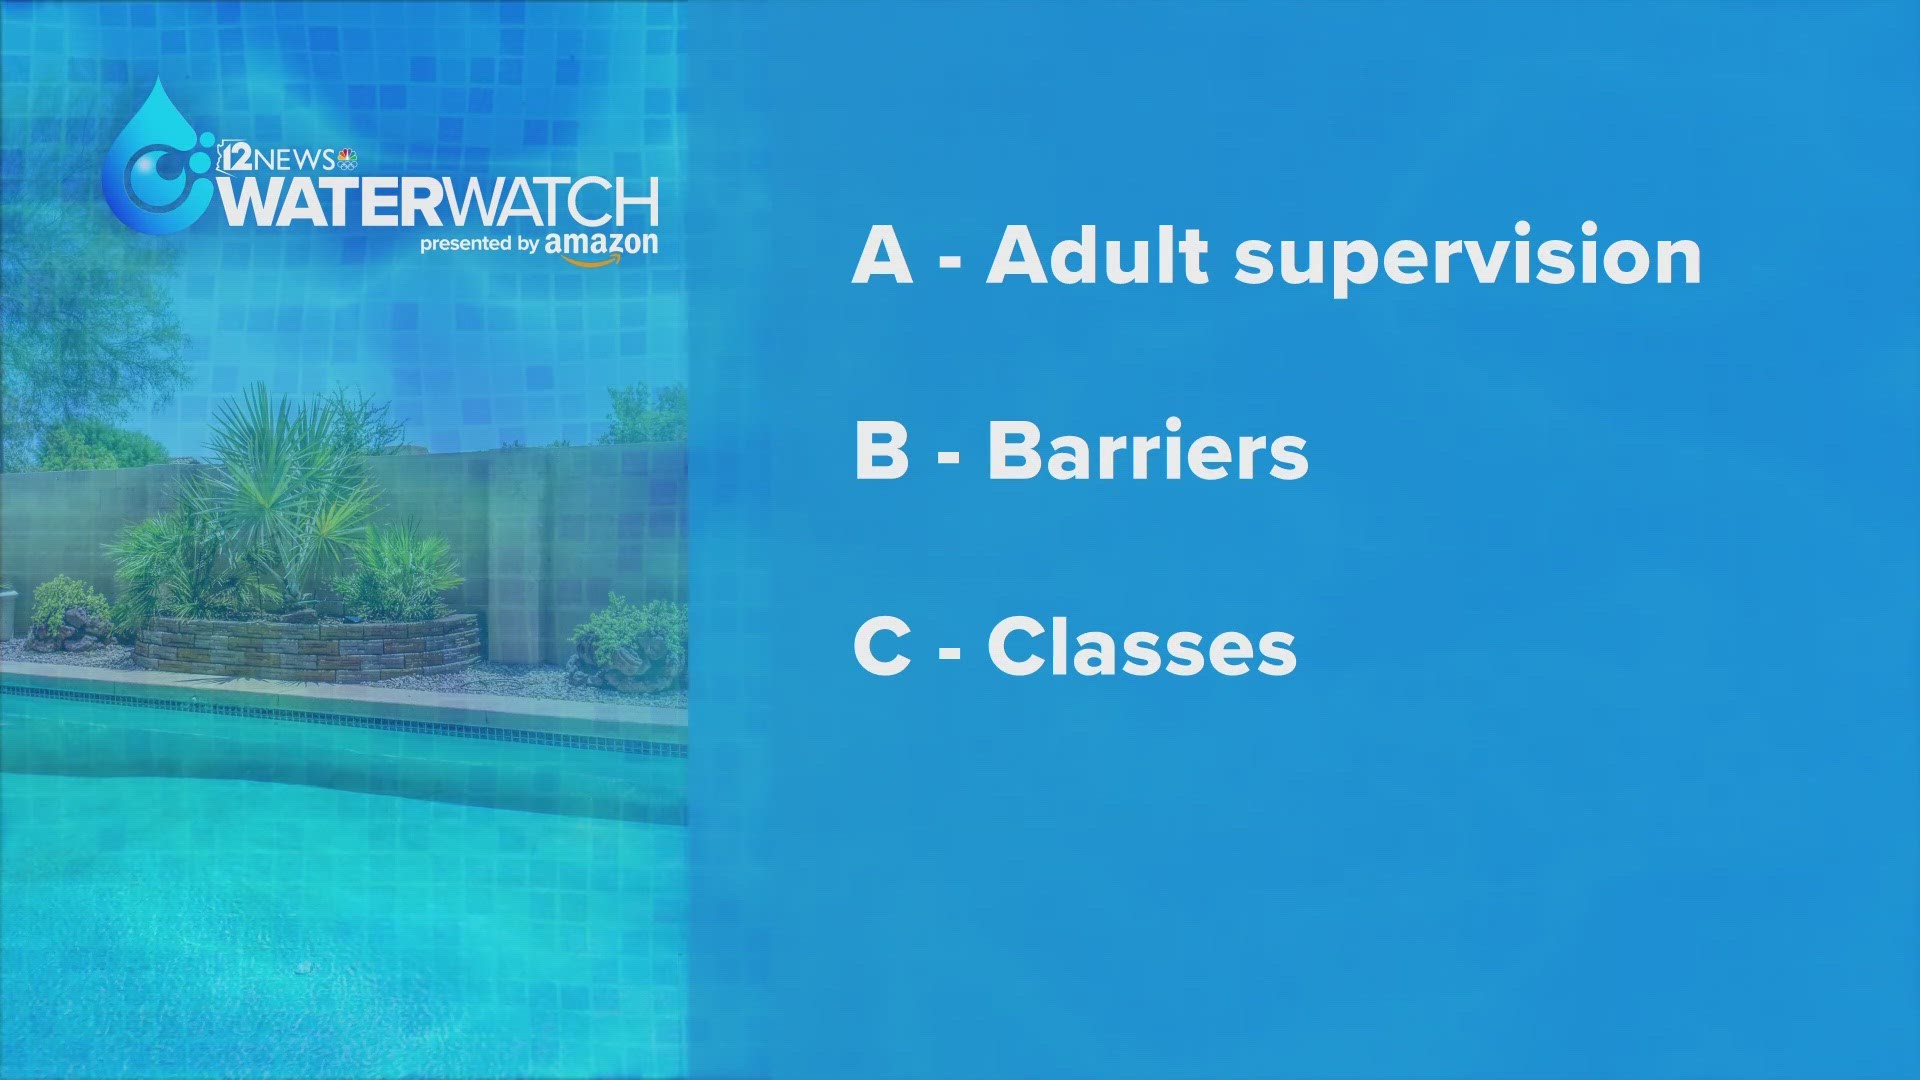 12News is working to keep you and your family safe around water. Here's what the ABCs of water safety are and why they are so important